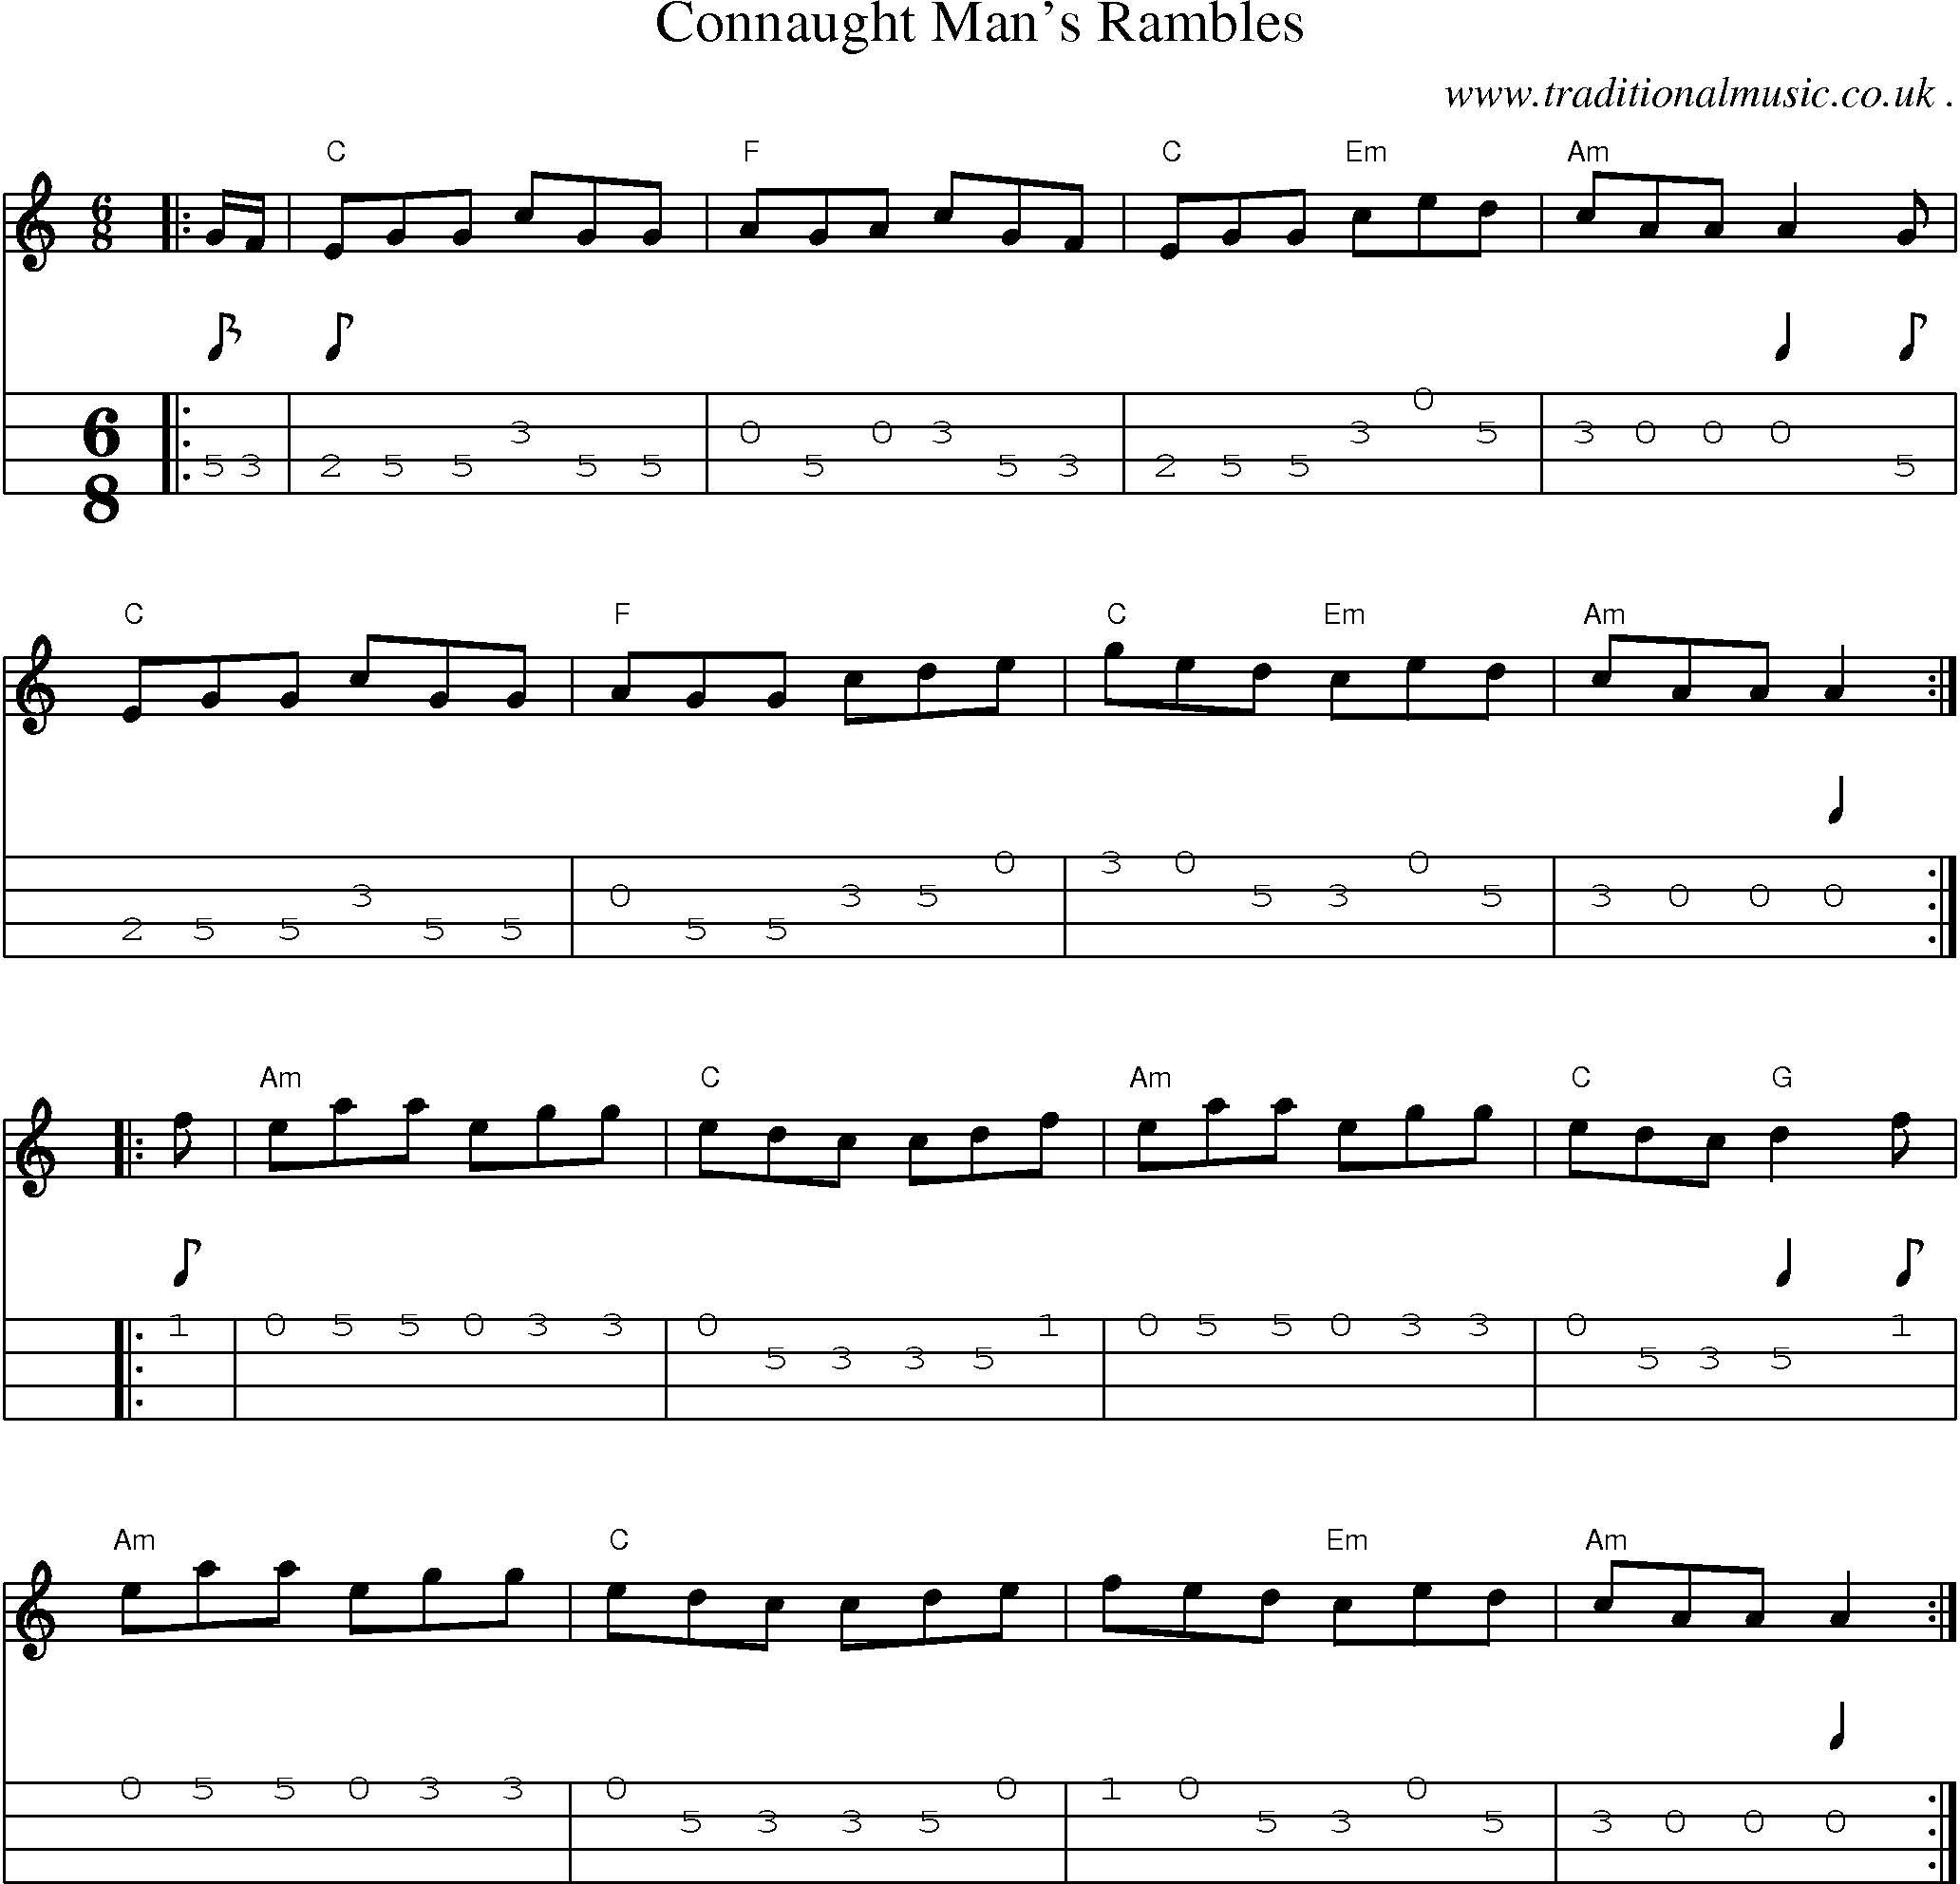 Music Score and Guitar Tabs for Connaught Mans Rambles